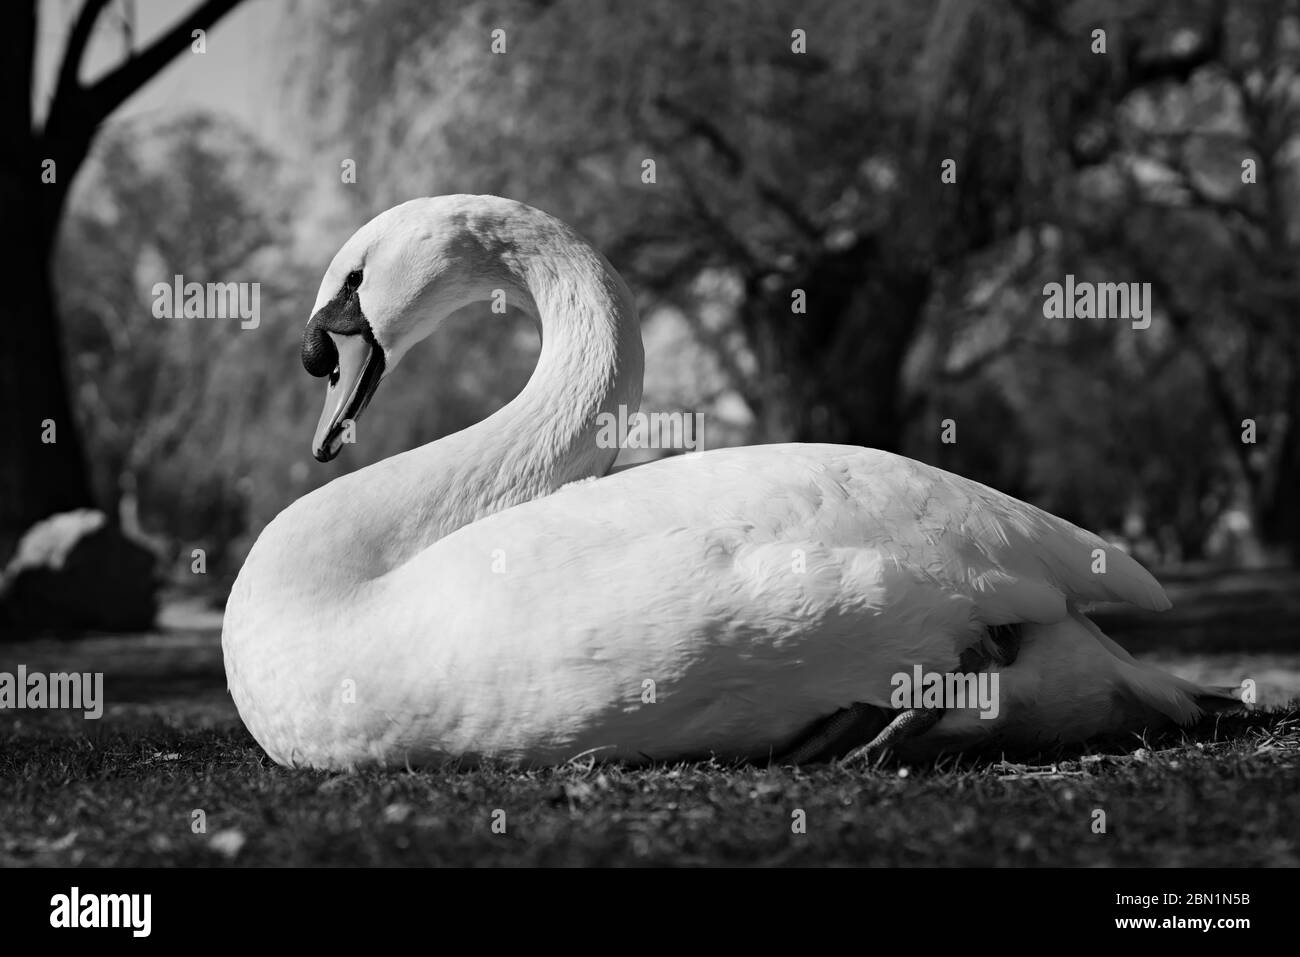 A free-living white adult swan sitting on the grass in a local park with blurry background trees; a close-up picture taken from low angle. Stock Photo